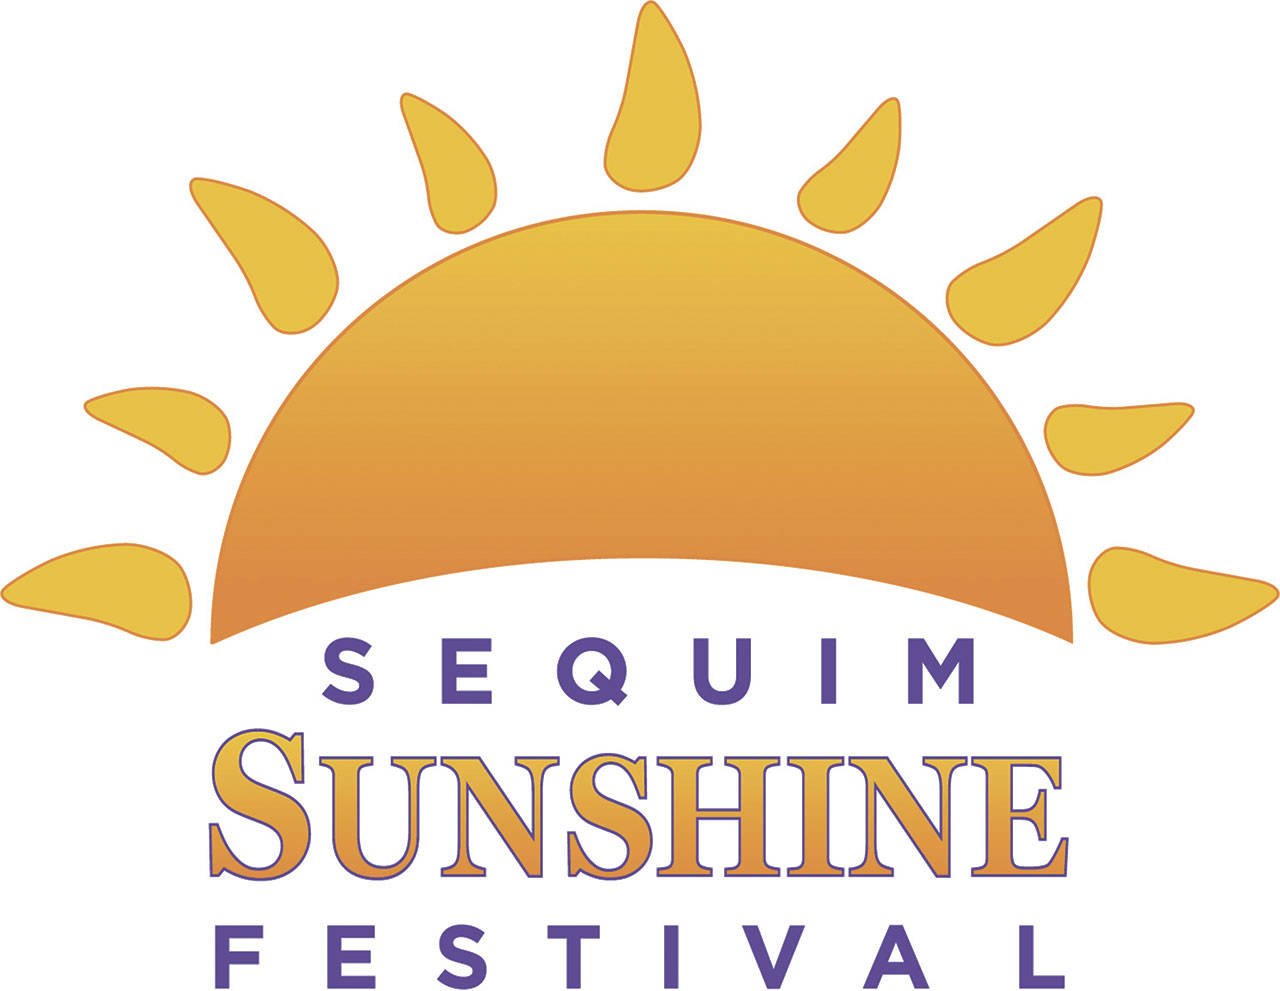 Next year, the Sequim Sunshine Festival looks to bring light to the area with unique events that draw people to Sequim in a typically quiet time of year for tourism. The festival runs March 6-7, 2020 throughout the City of Sequim. Photo courtesy City of Sequim